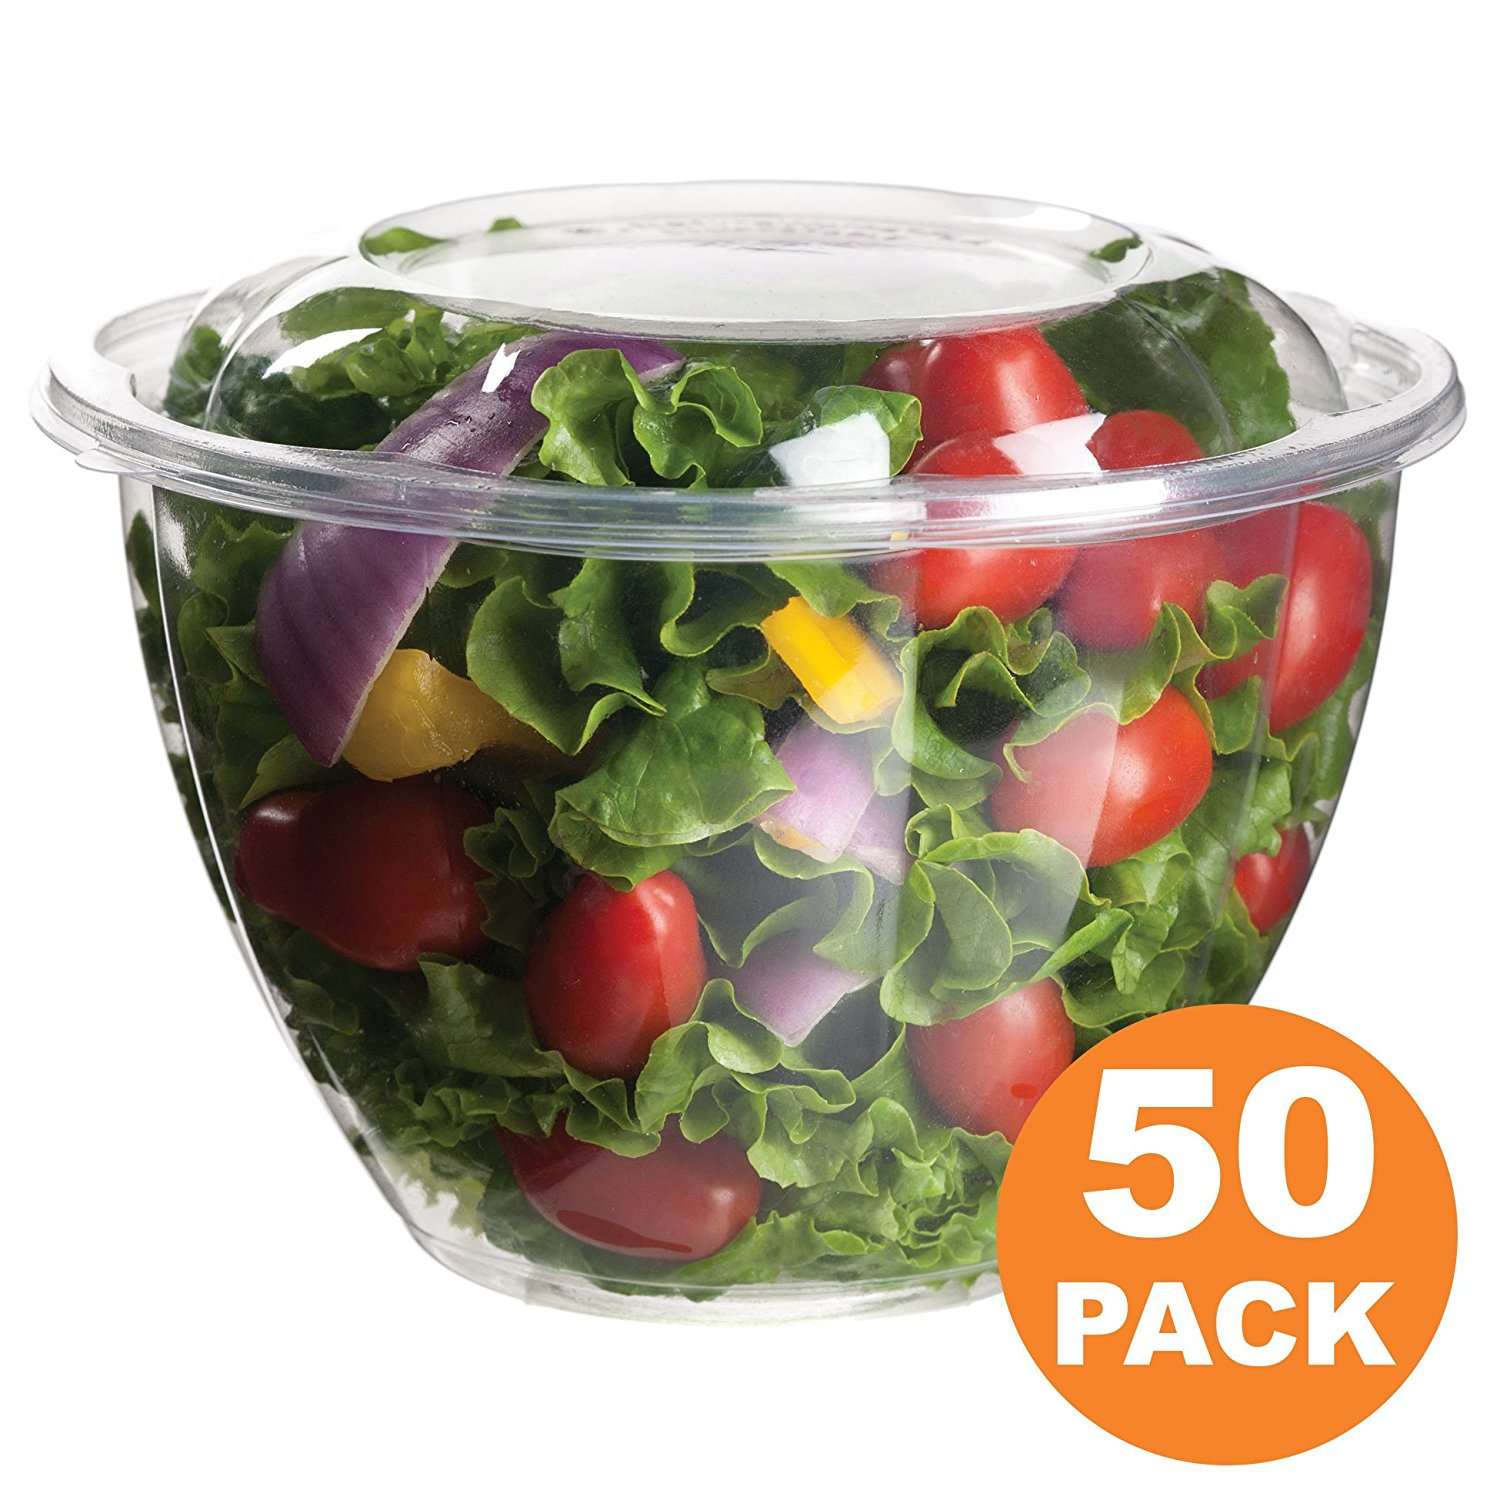 Clear Plastic Bowl With Dome Lids for Salads Fruits ...